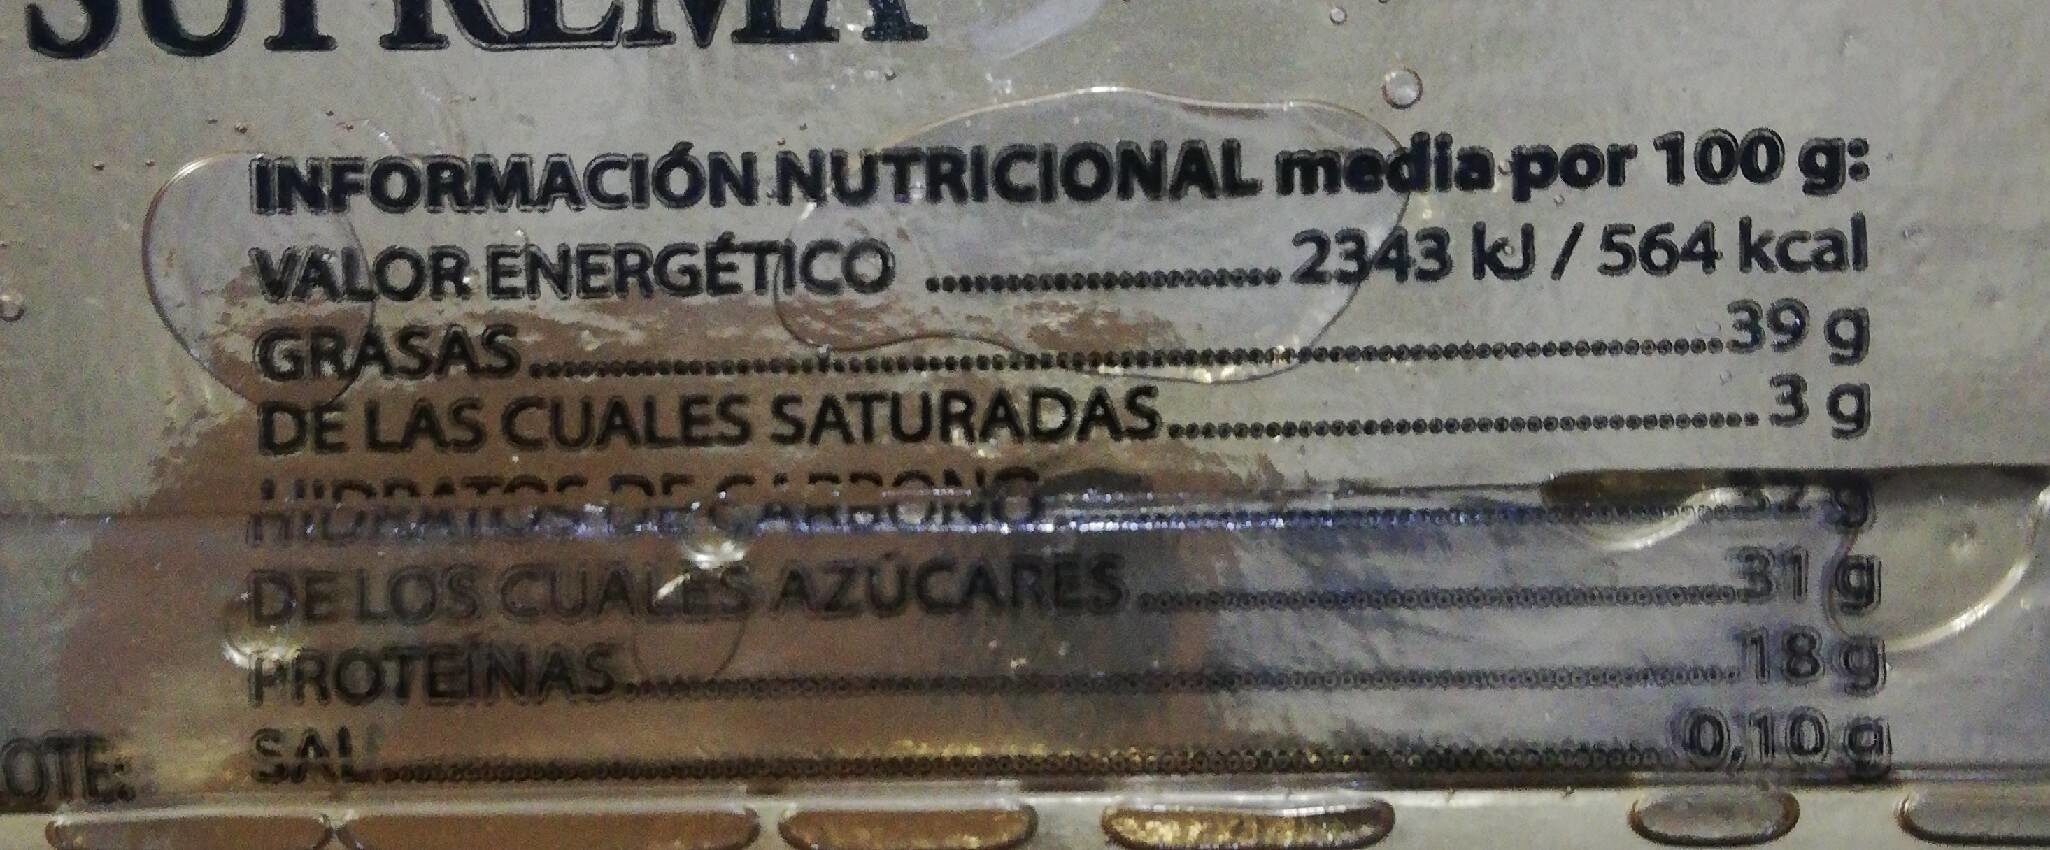 Turrones - Nutrition facts - fr